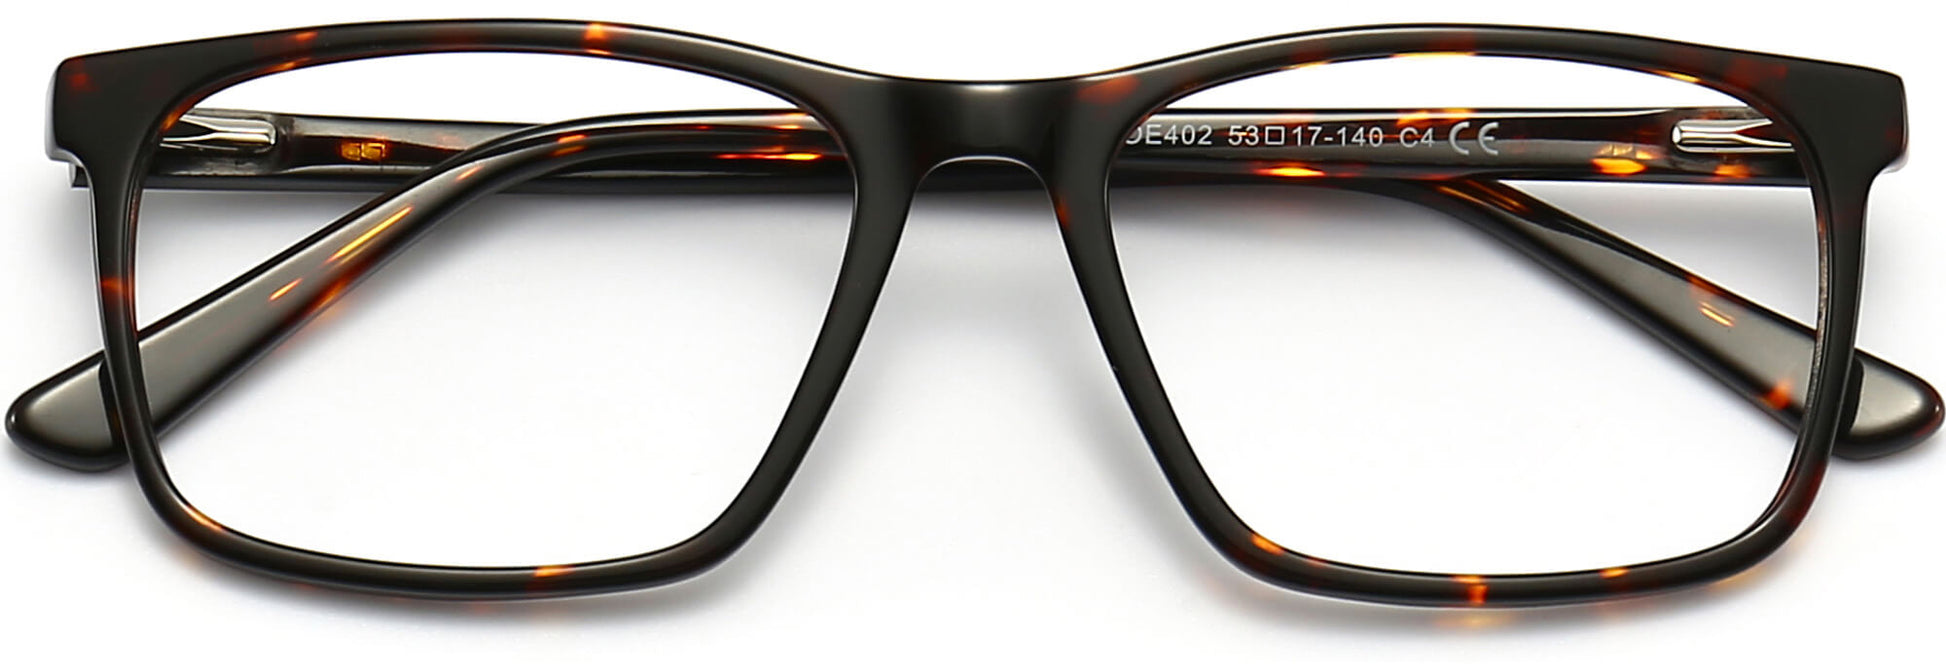 Dillon Square Tortoise Eyeglasses from ANRRI, closed view